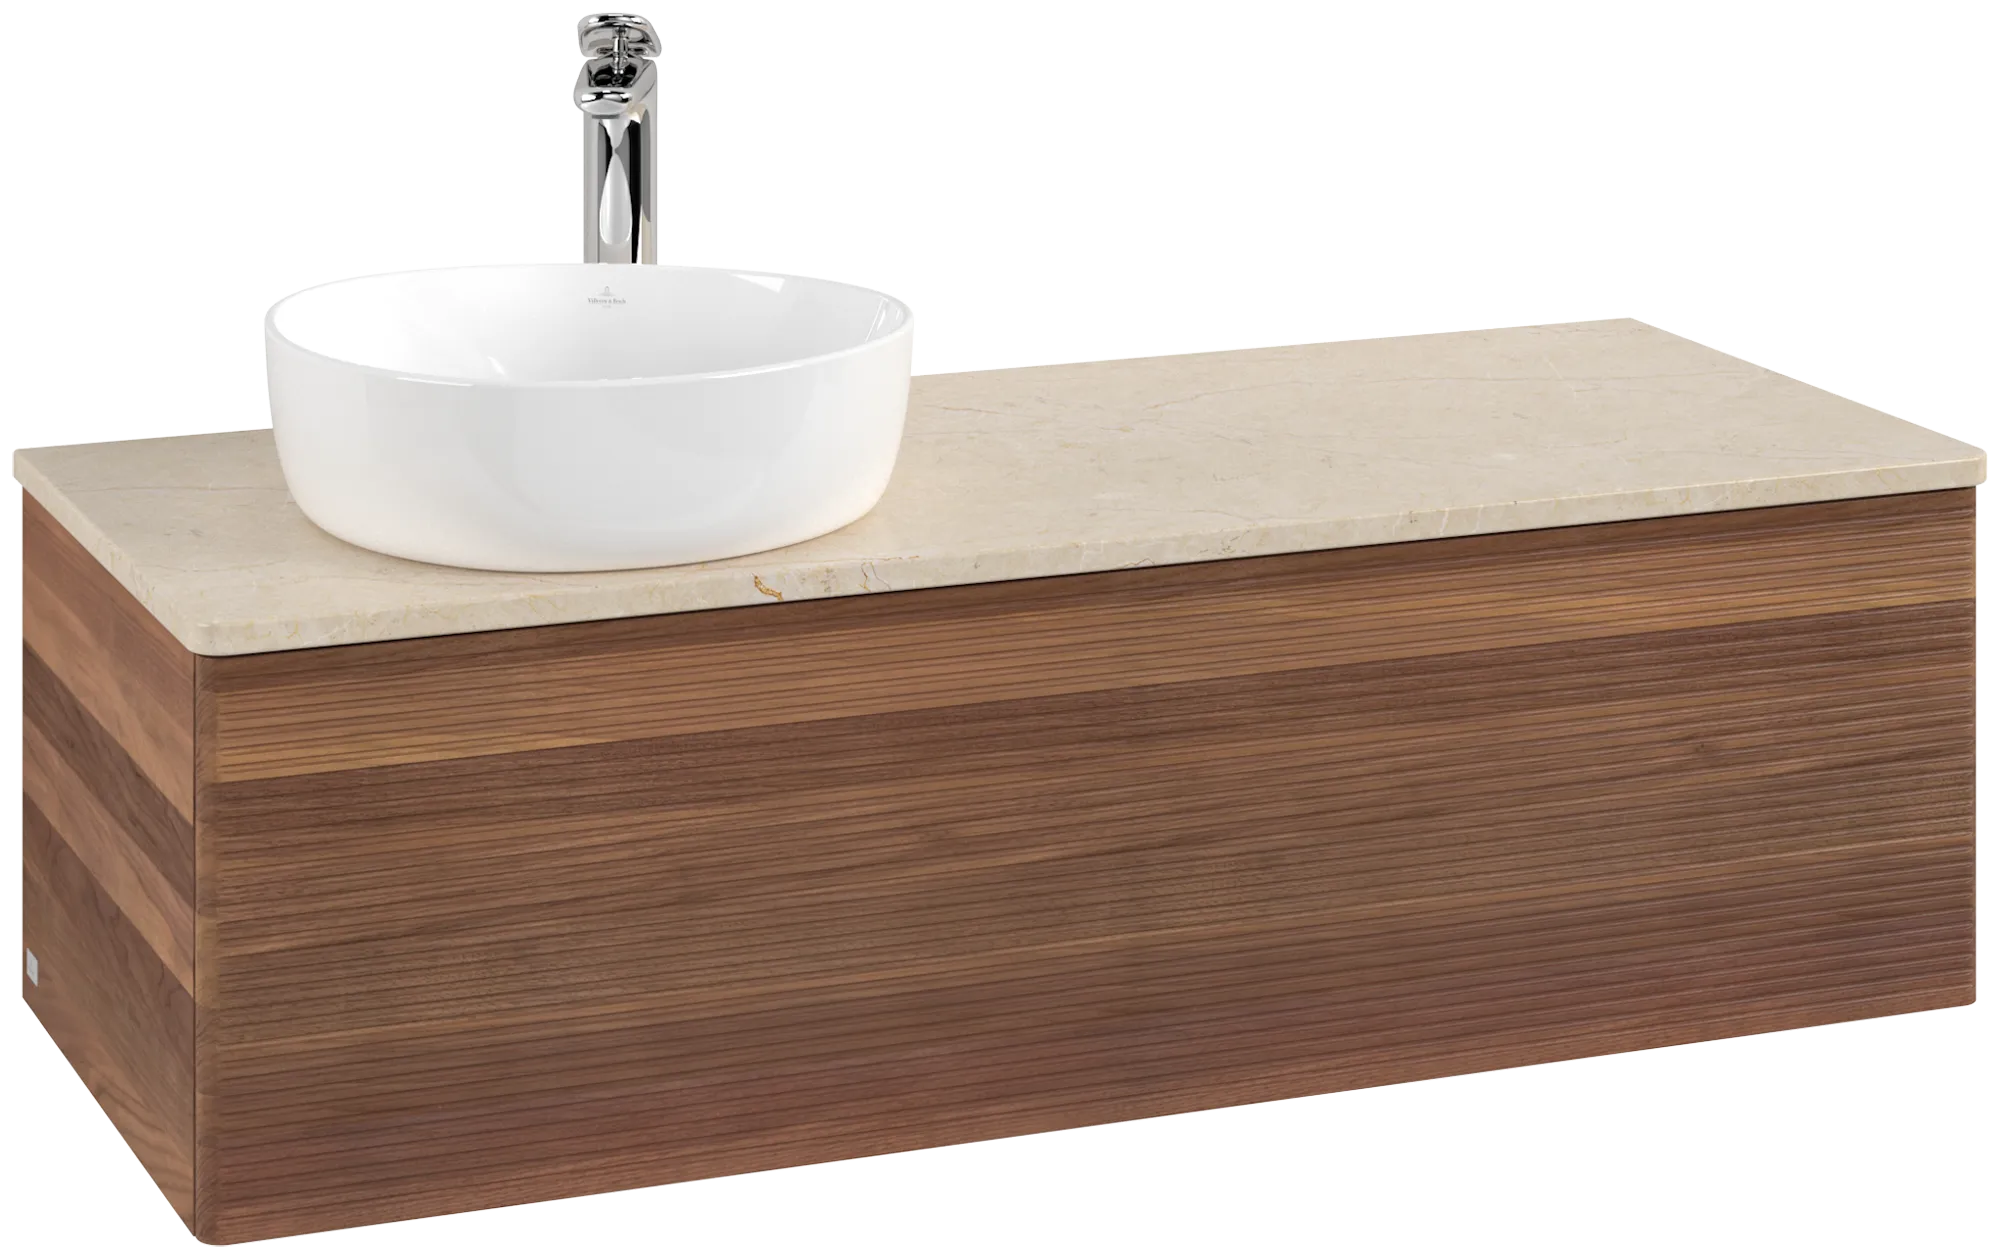 VILLEROY BOCH Antao Vanity unit, 1 pull-out compartment, 1200 x 360 x 500 mm, Front with grain texture, Warm Walnut / Botticino #K33153HM resmi